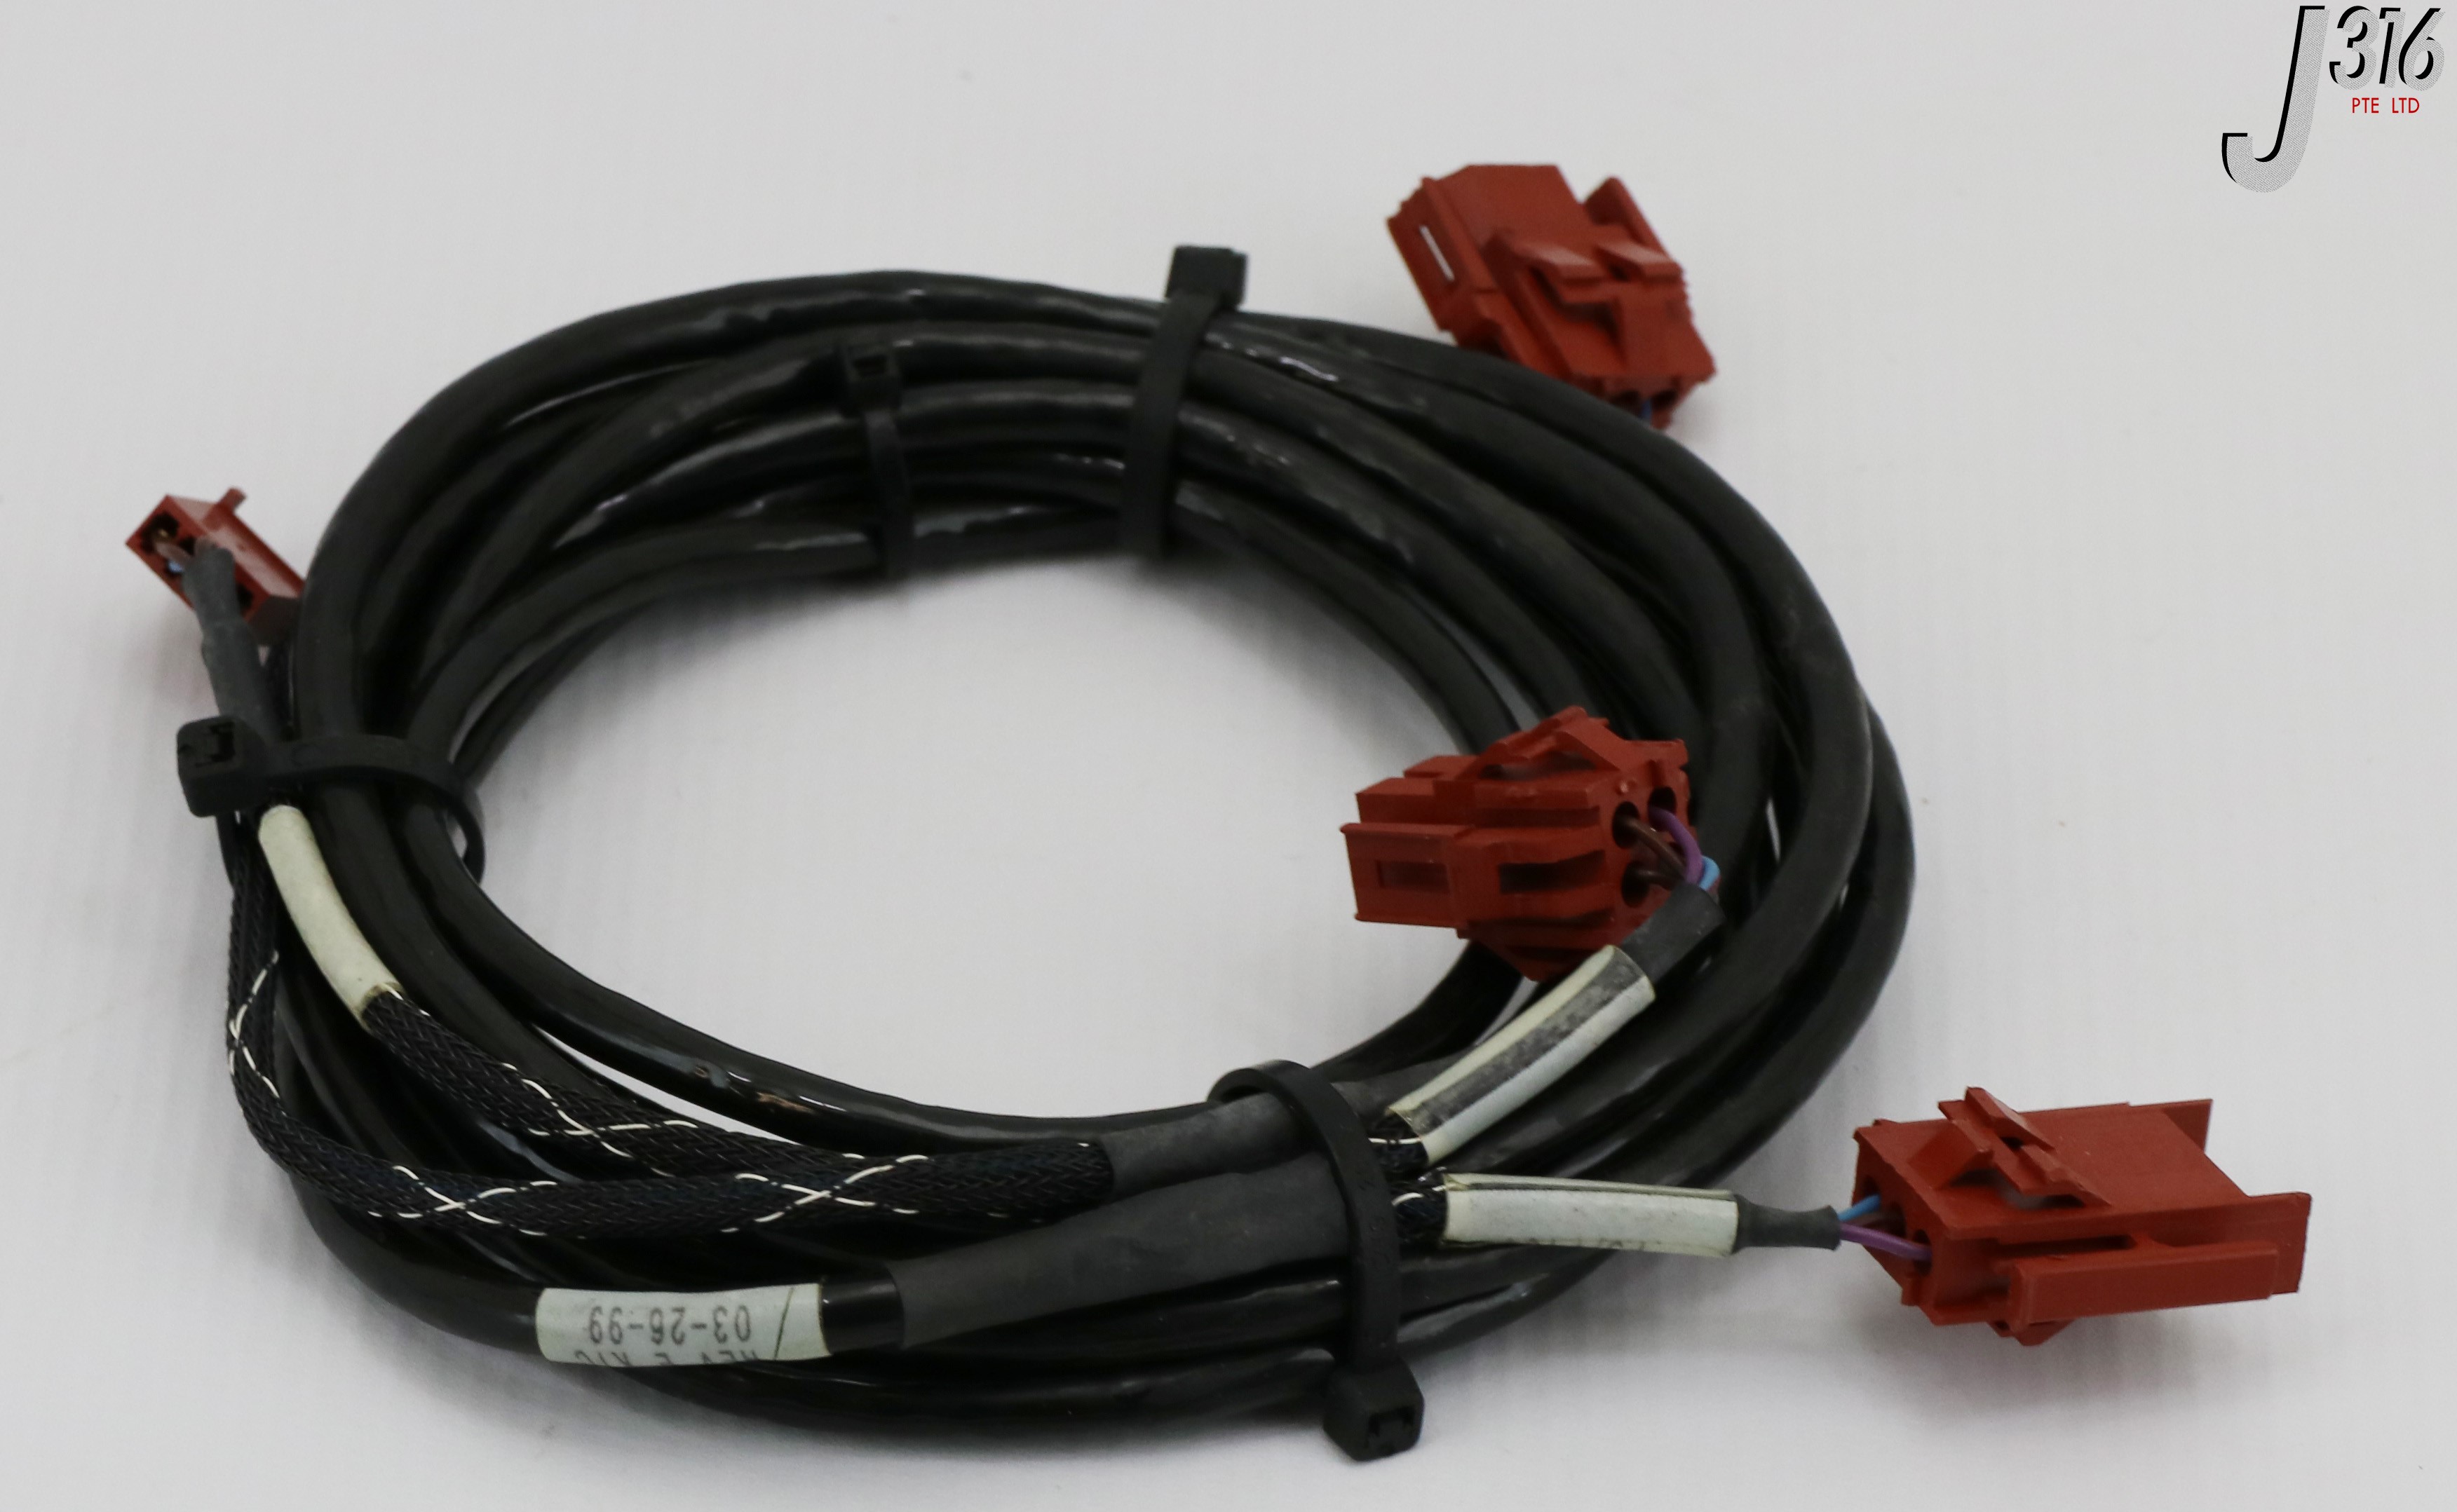 Details about   142-0601// AMAT APPLIED 0150-76259 CABLE ASSY BFR UTI RGA-POS 8 NEW 